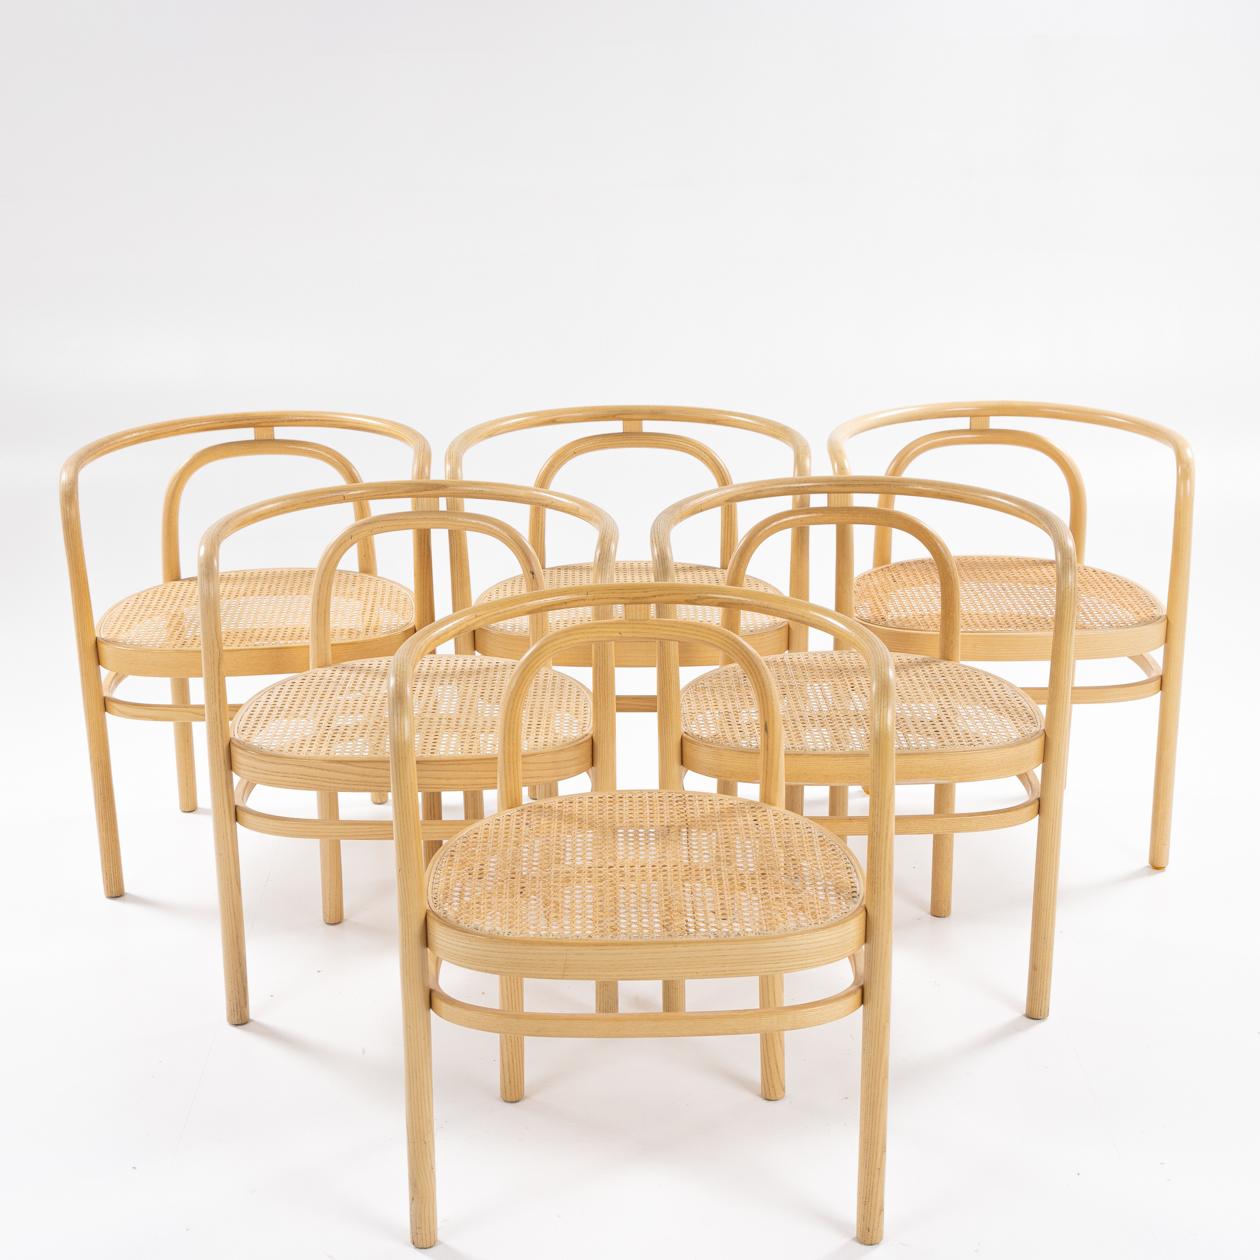 20th Century Set of 6 chairs by Poul Kjærholm 